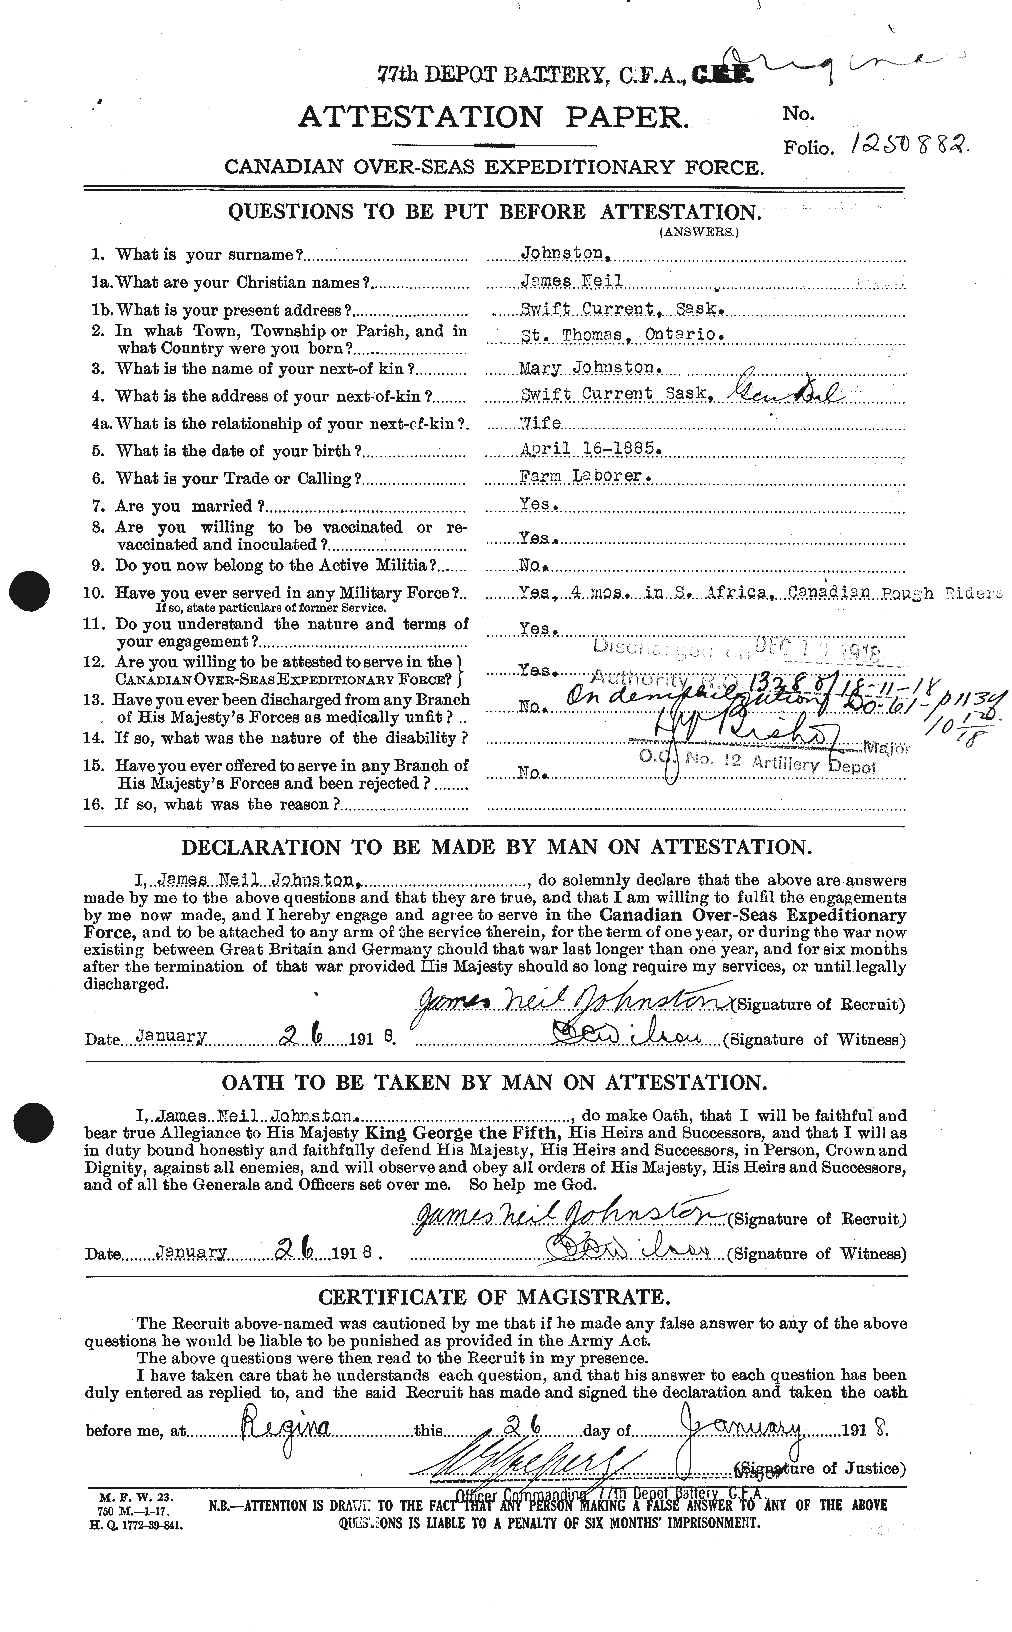 Personnel Records of the First World War - CEF 422747a